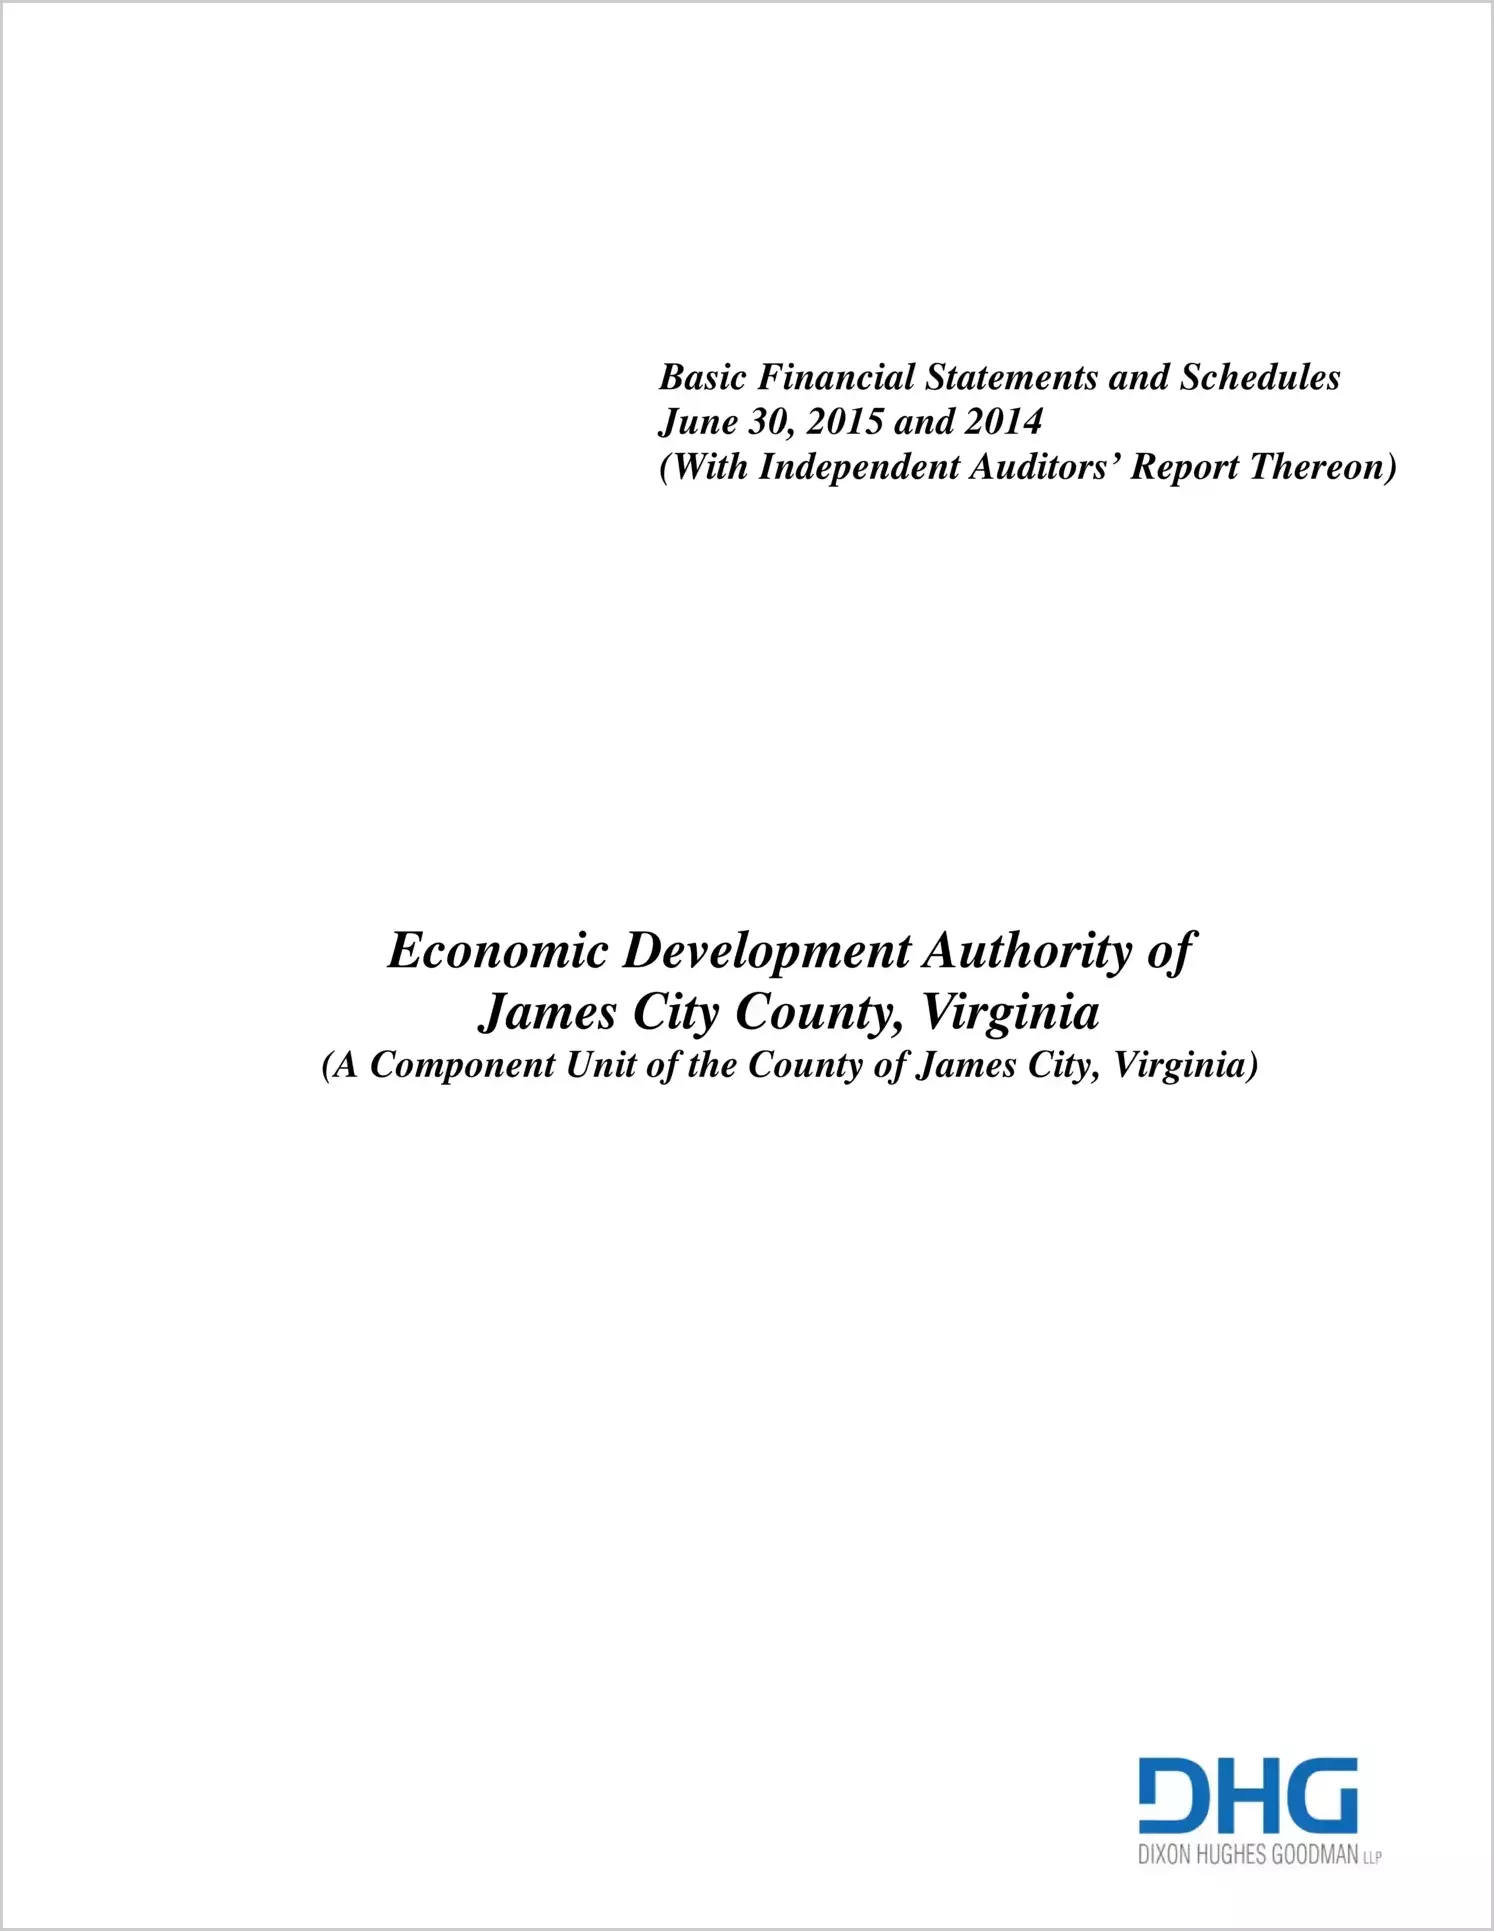 2015 ABC/Other Annual Financial Report  for James City County Economic Development Authority